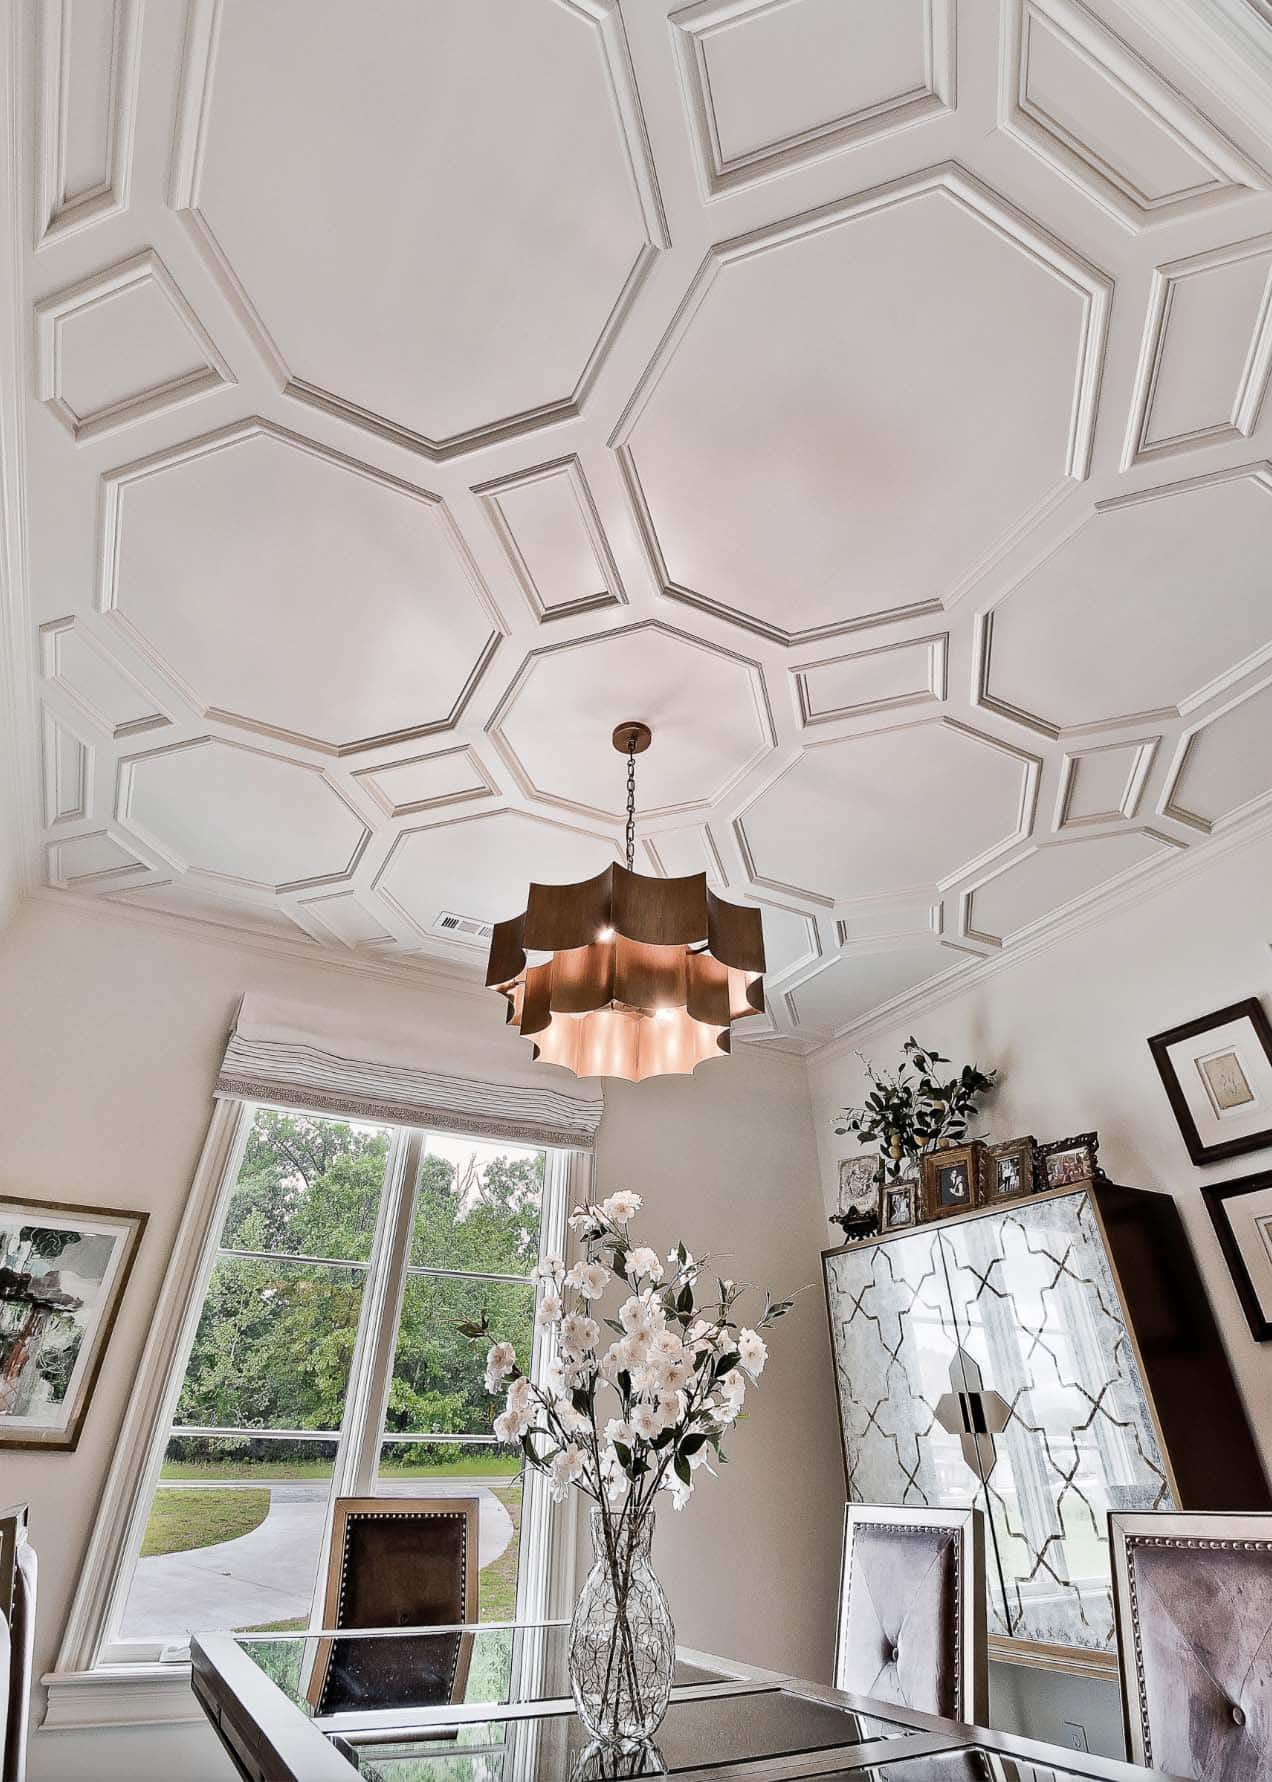 transitional style dining room ceiling detail